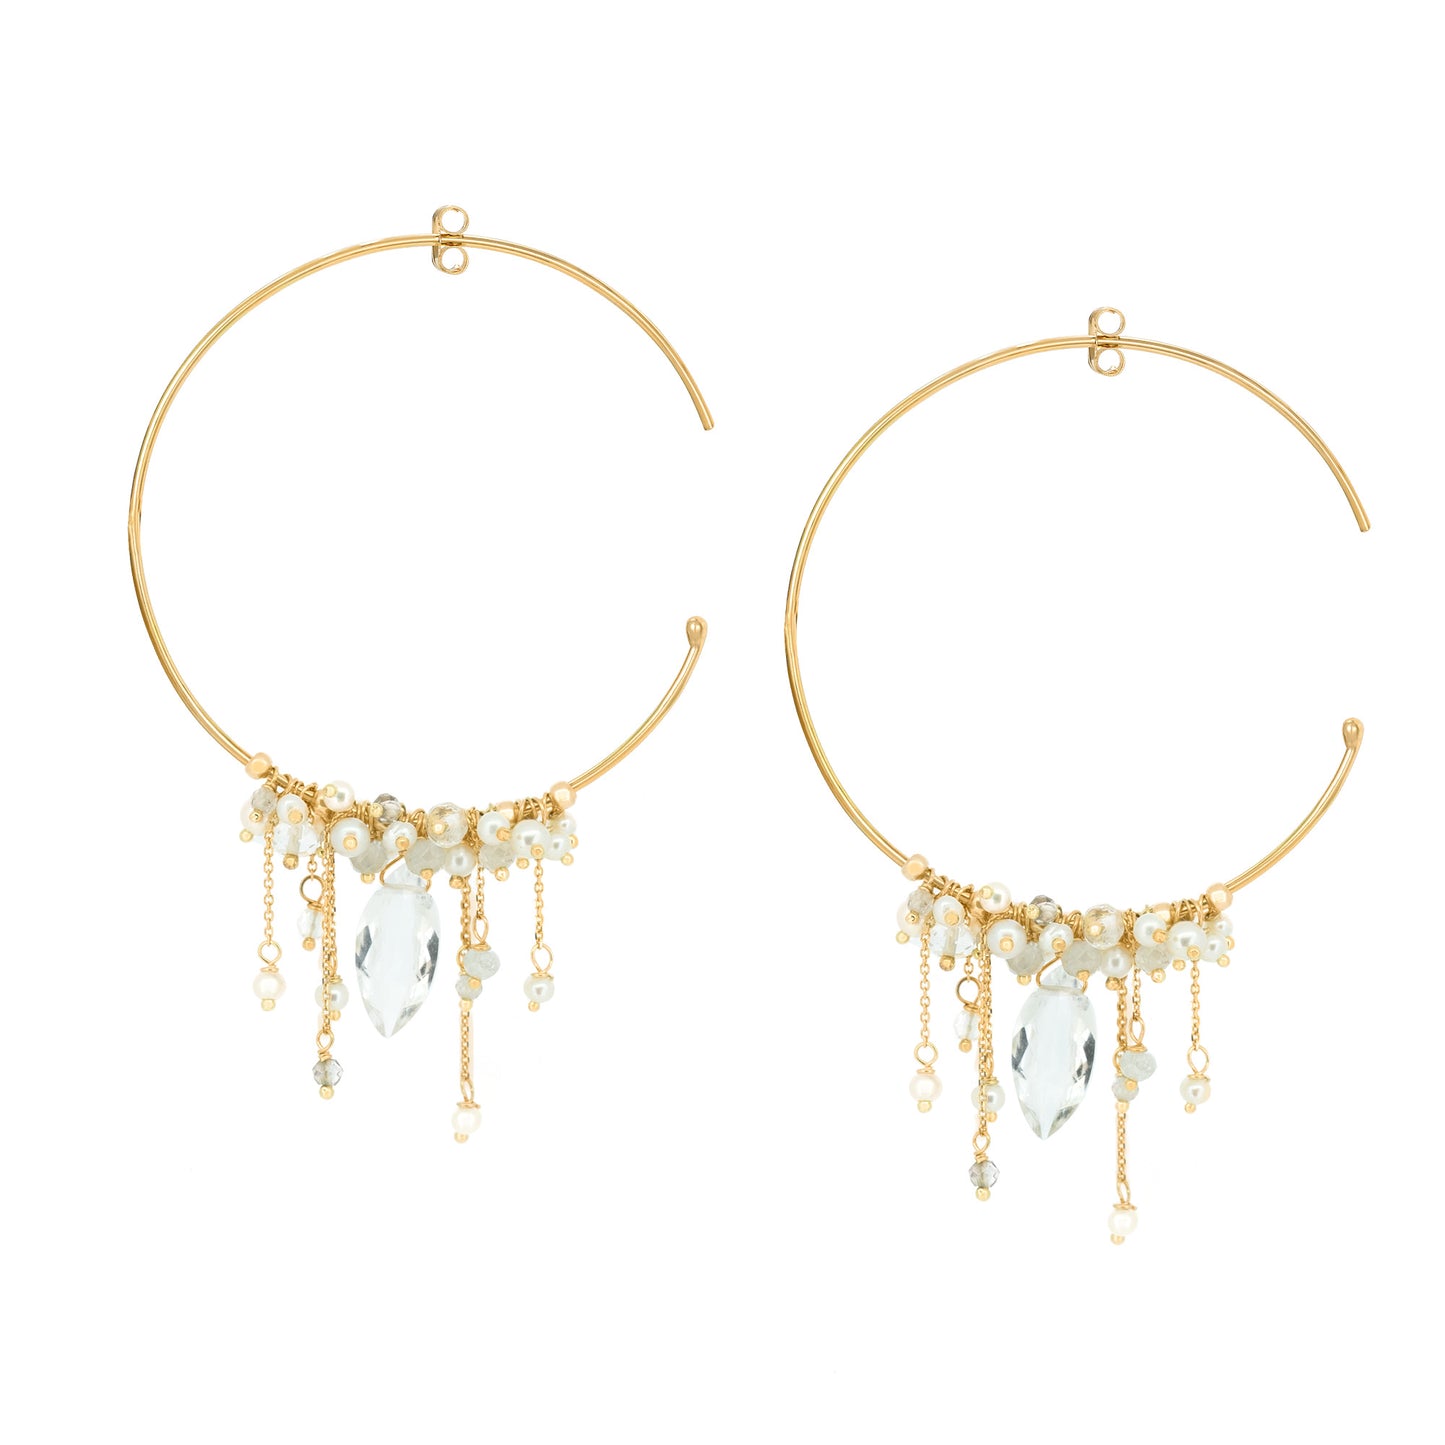 18ct Gold Goddess of Love hoop earrings with clusters of Pearl and Crystal beads/drops.